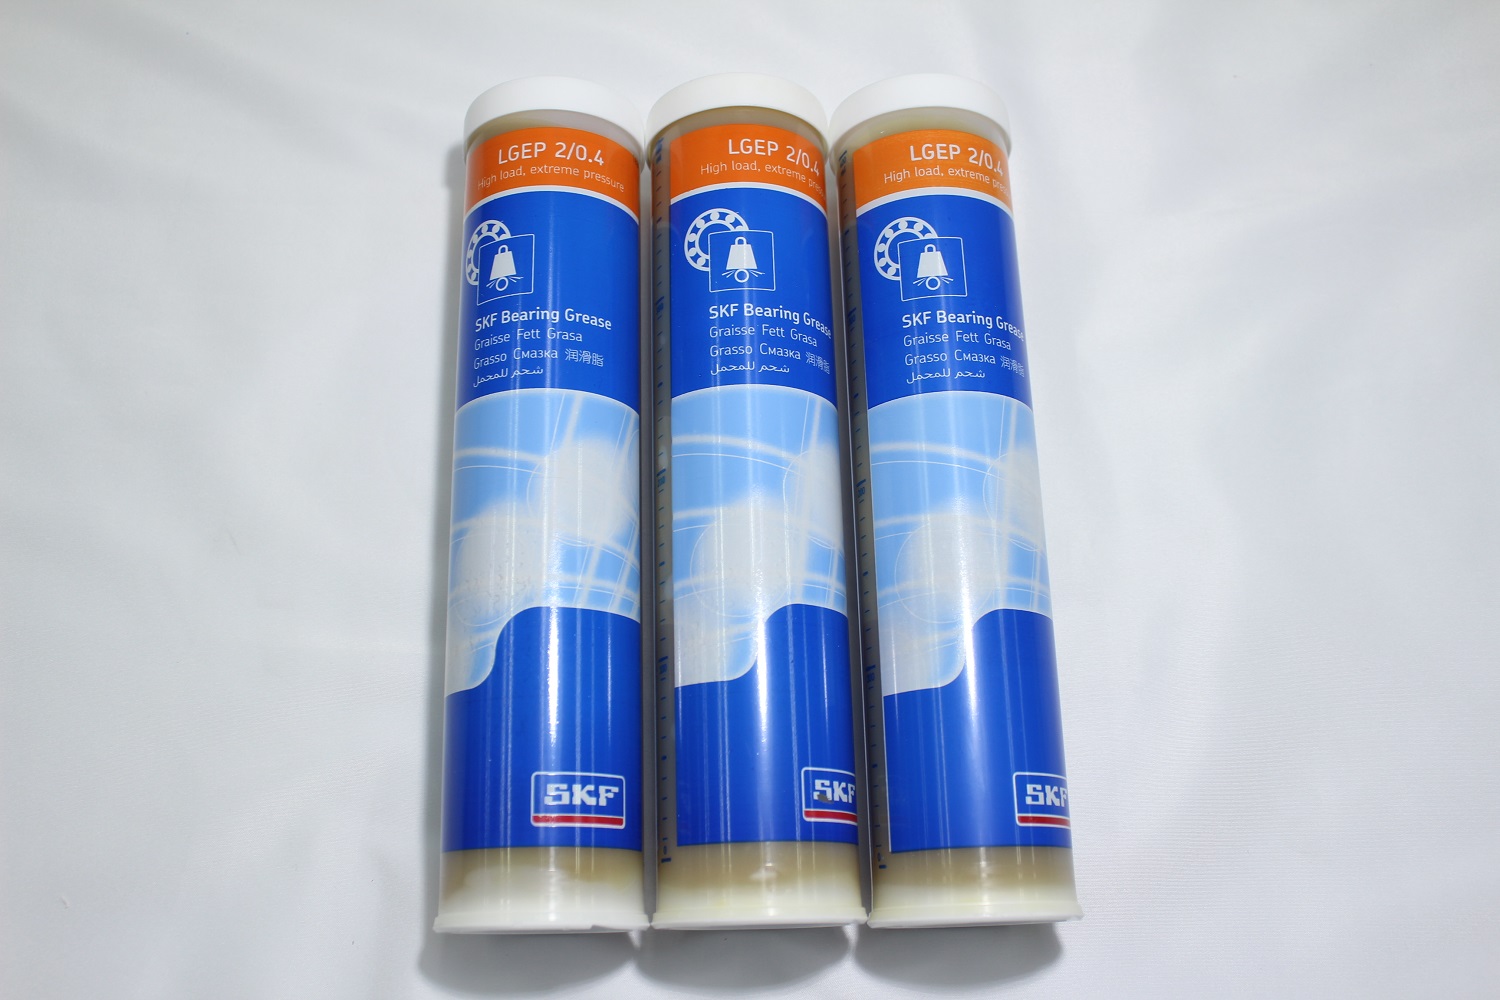 SKF LGEP 2-0.4 400G Grease for Bearing in Machinery Production Line